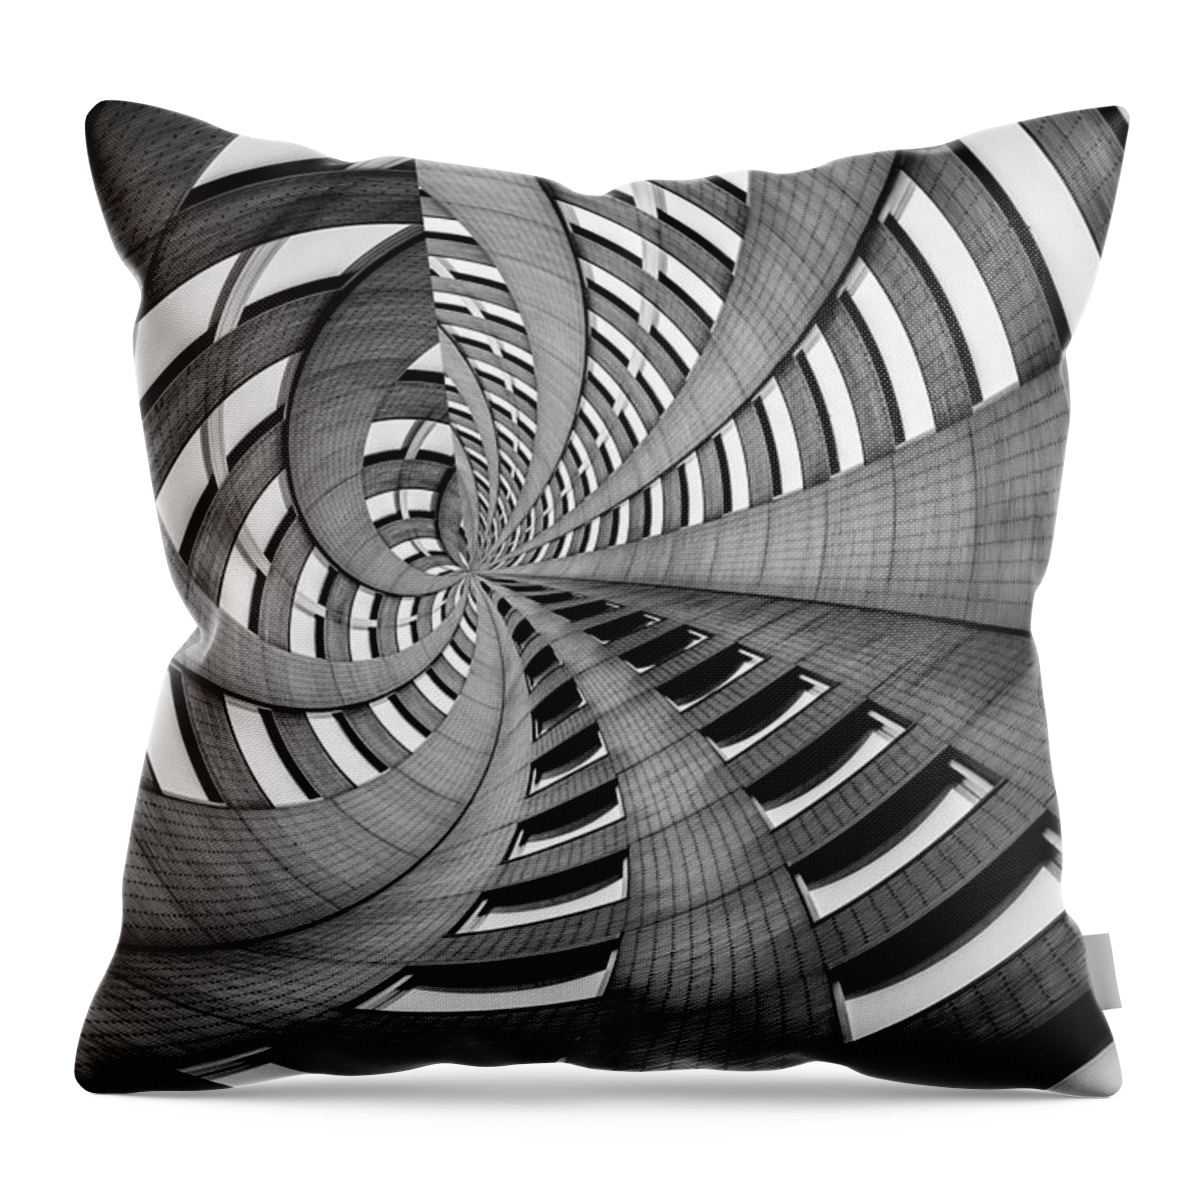 Down The Rabbit Hole Throw Pillow featuring the photograph Down The Rabbit Hole by Az Jackson